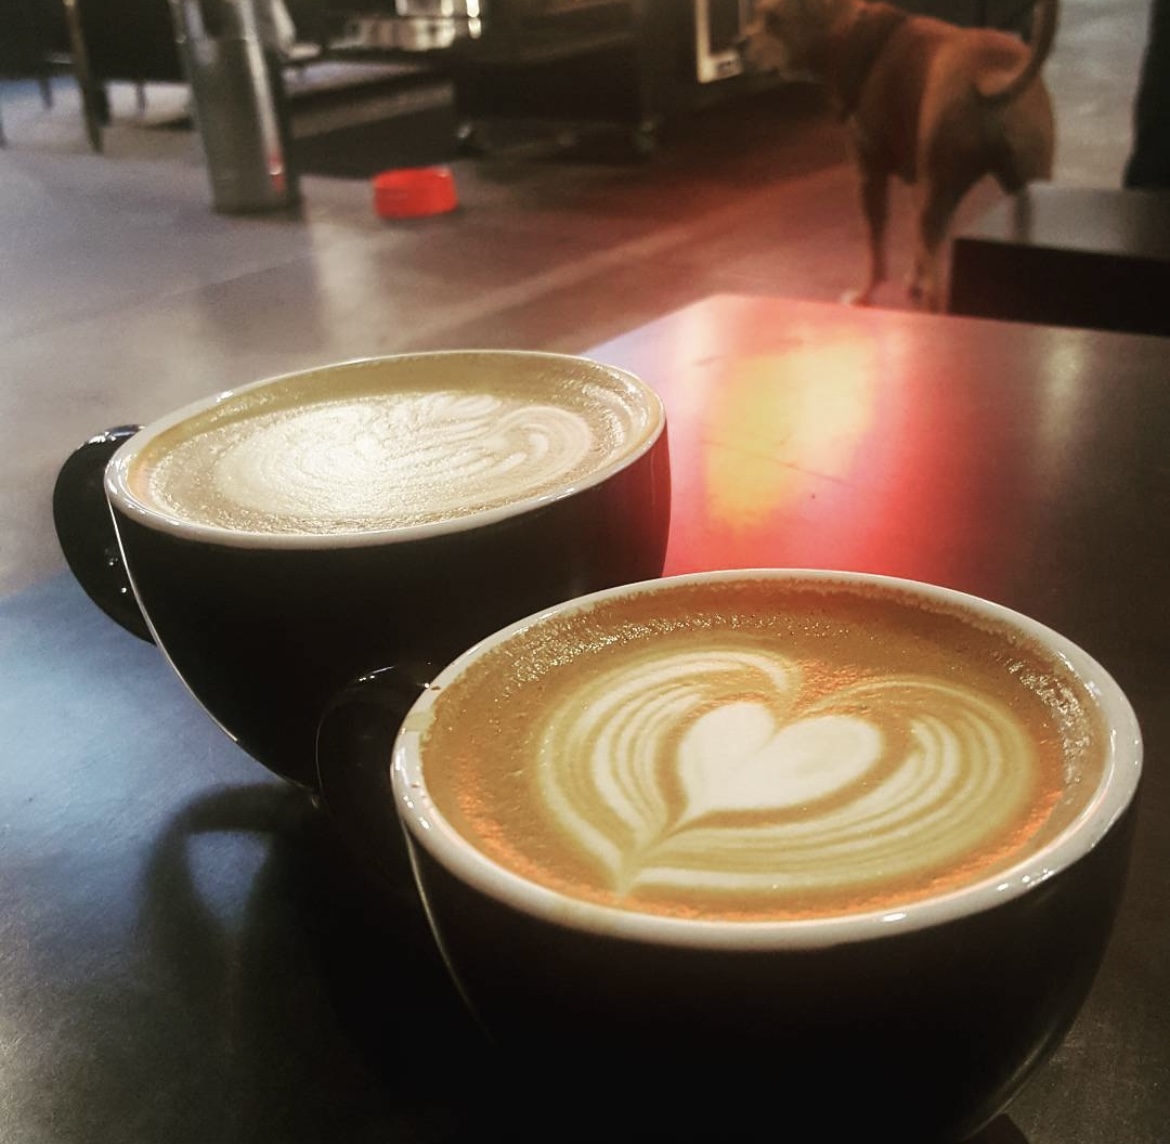 Two lattes in coffee mugs withy latte art